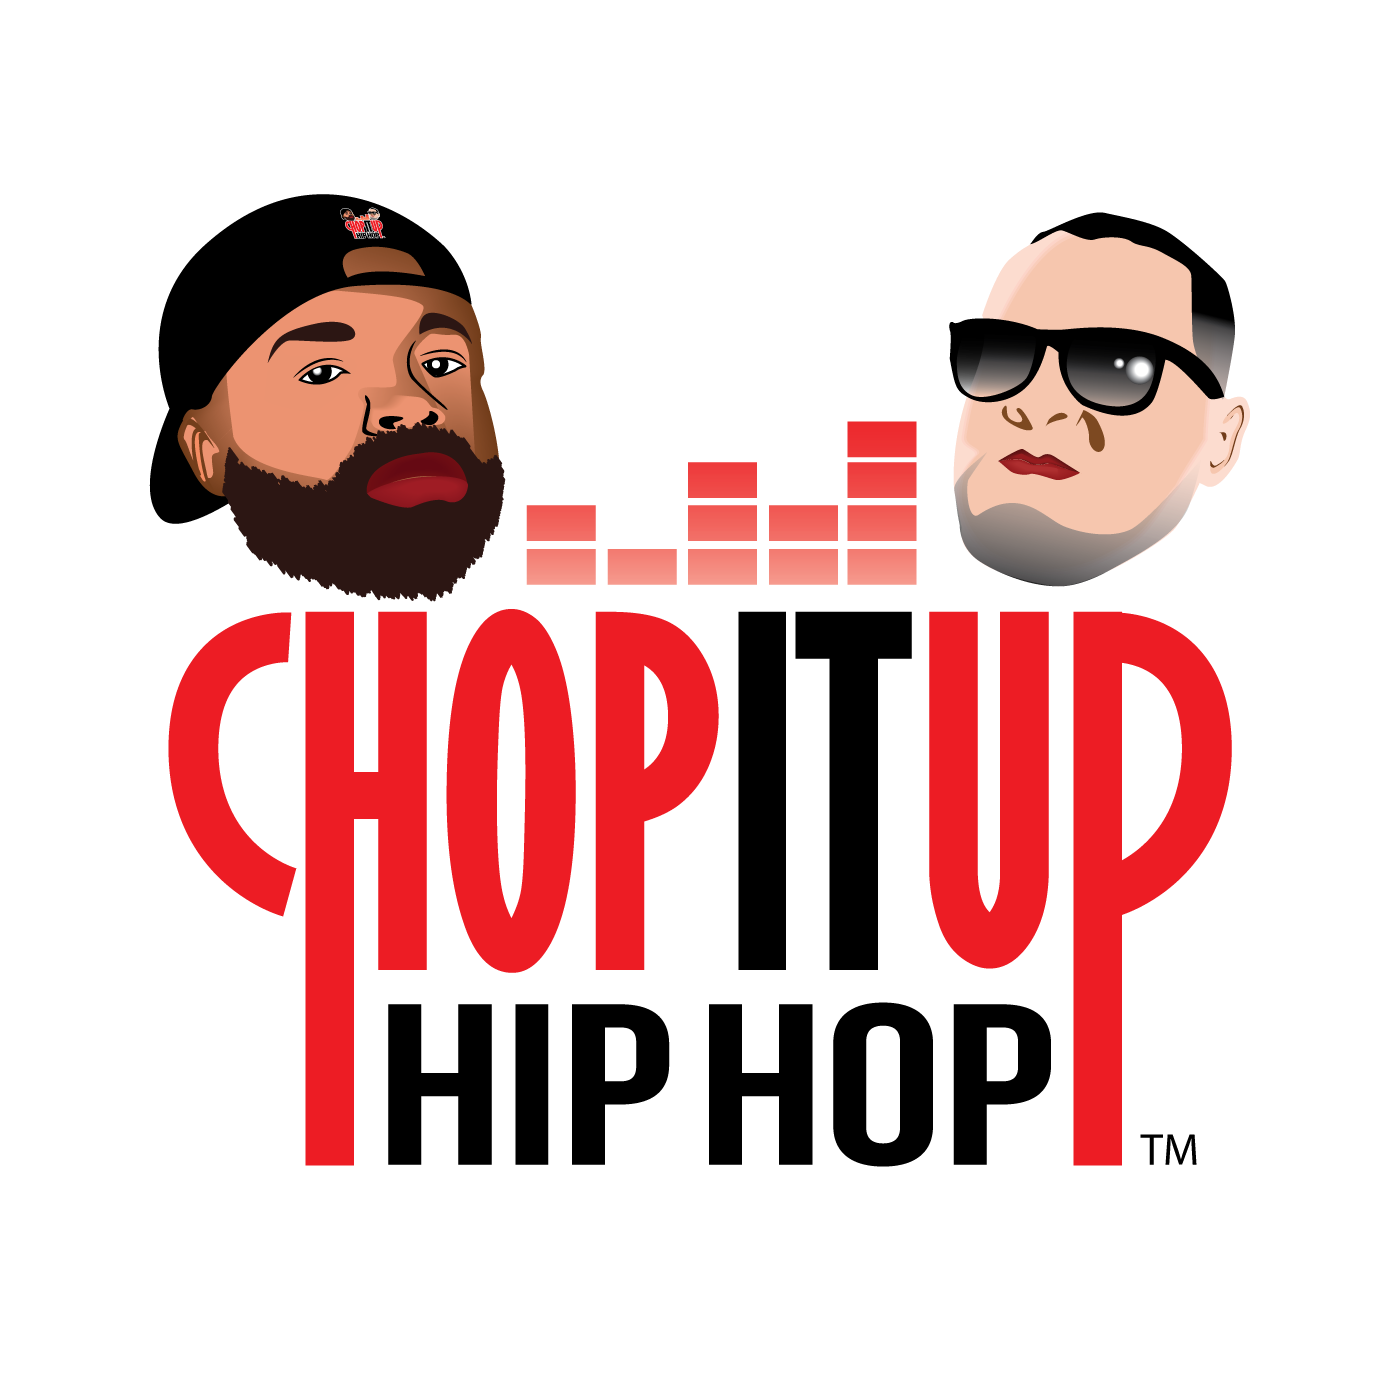 Episode 13- Year end Chop up wrap up